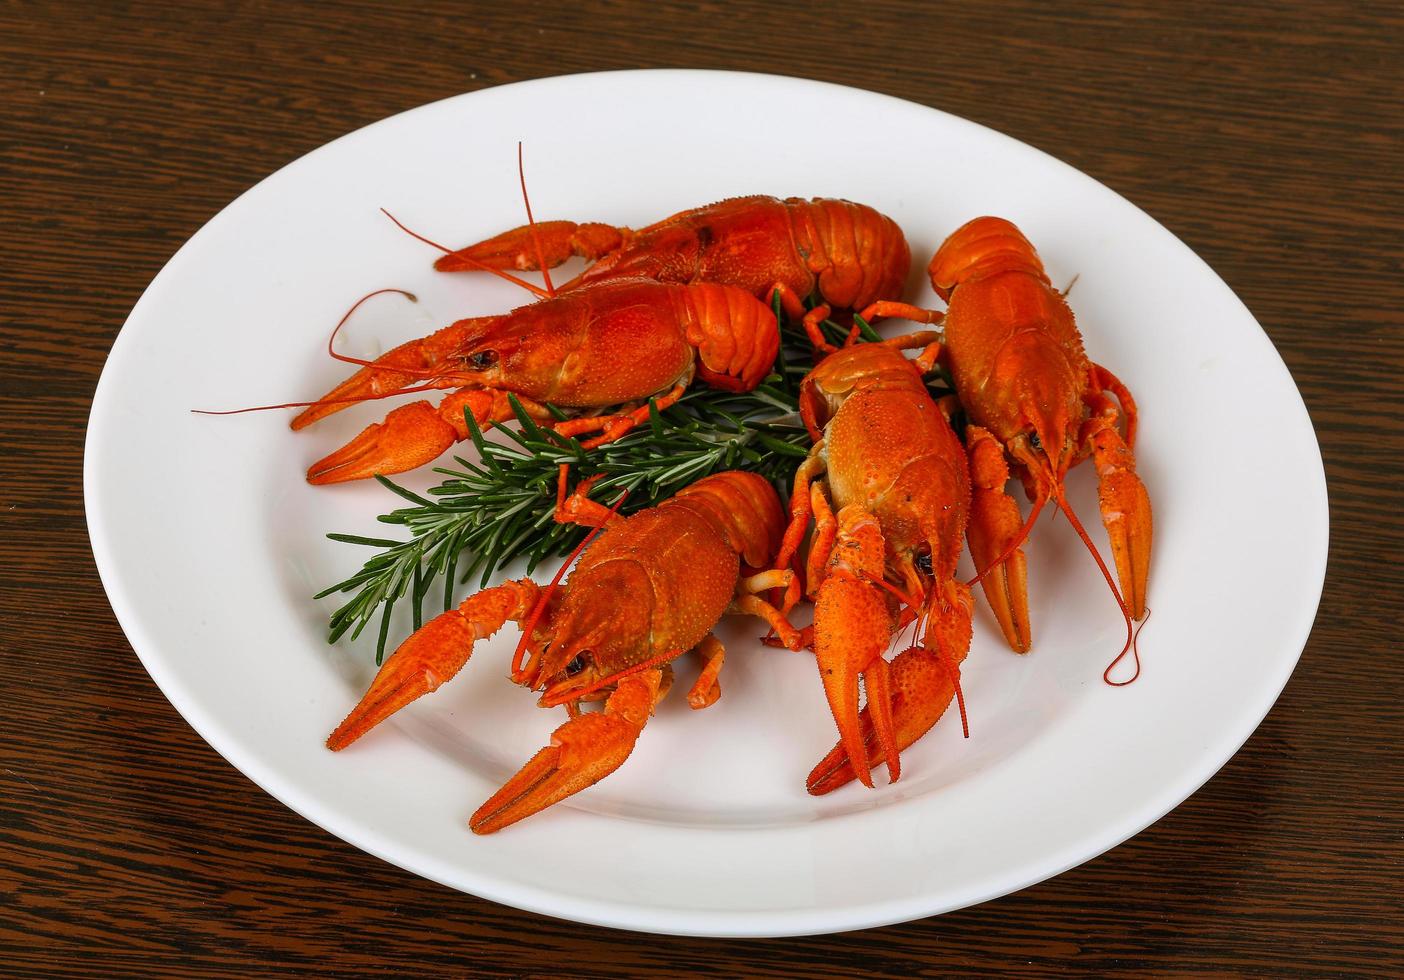 Crayfish on the plate and wooden background photo